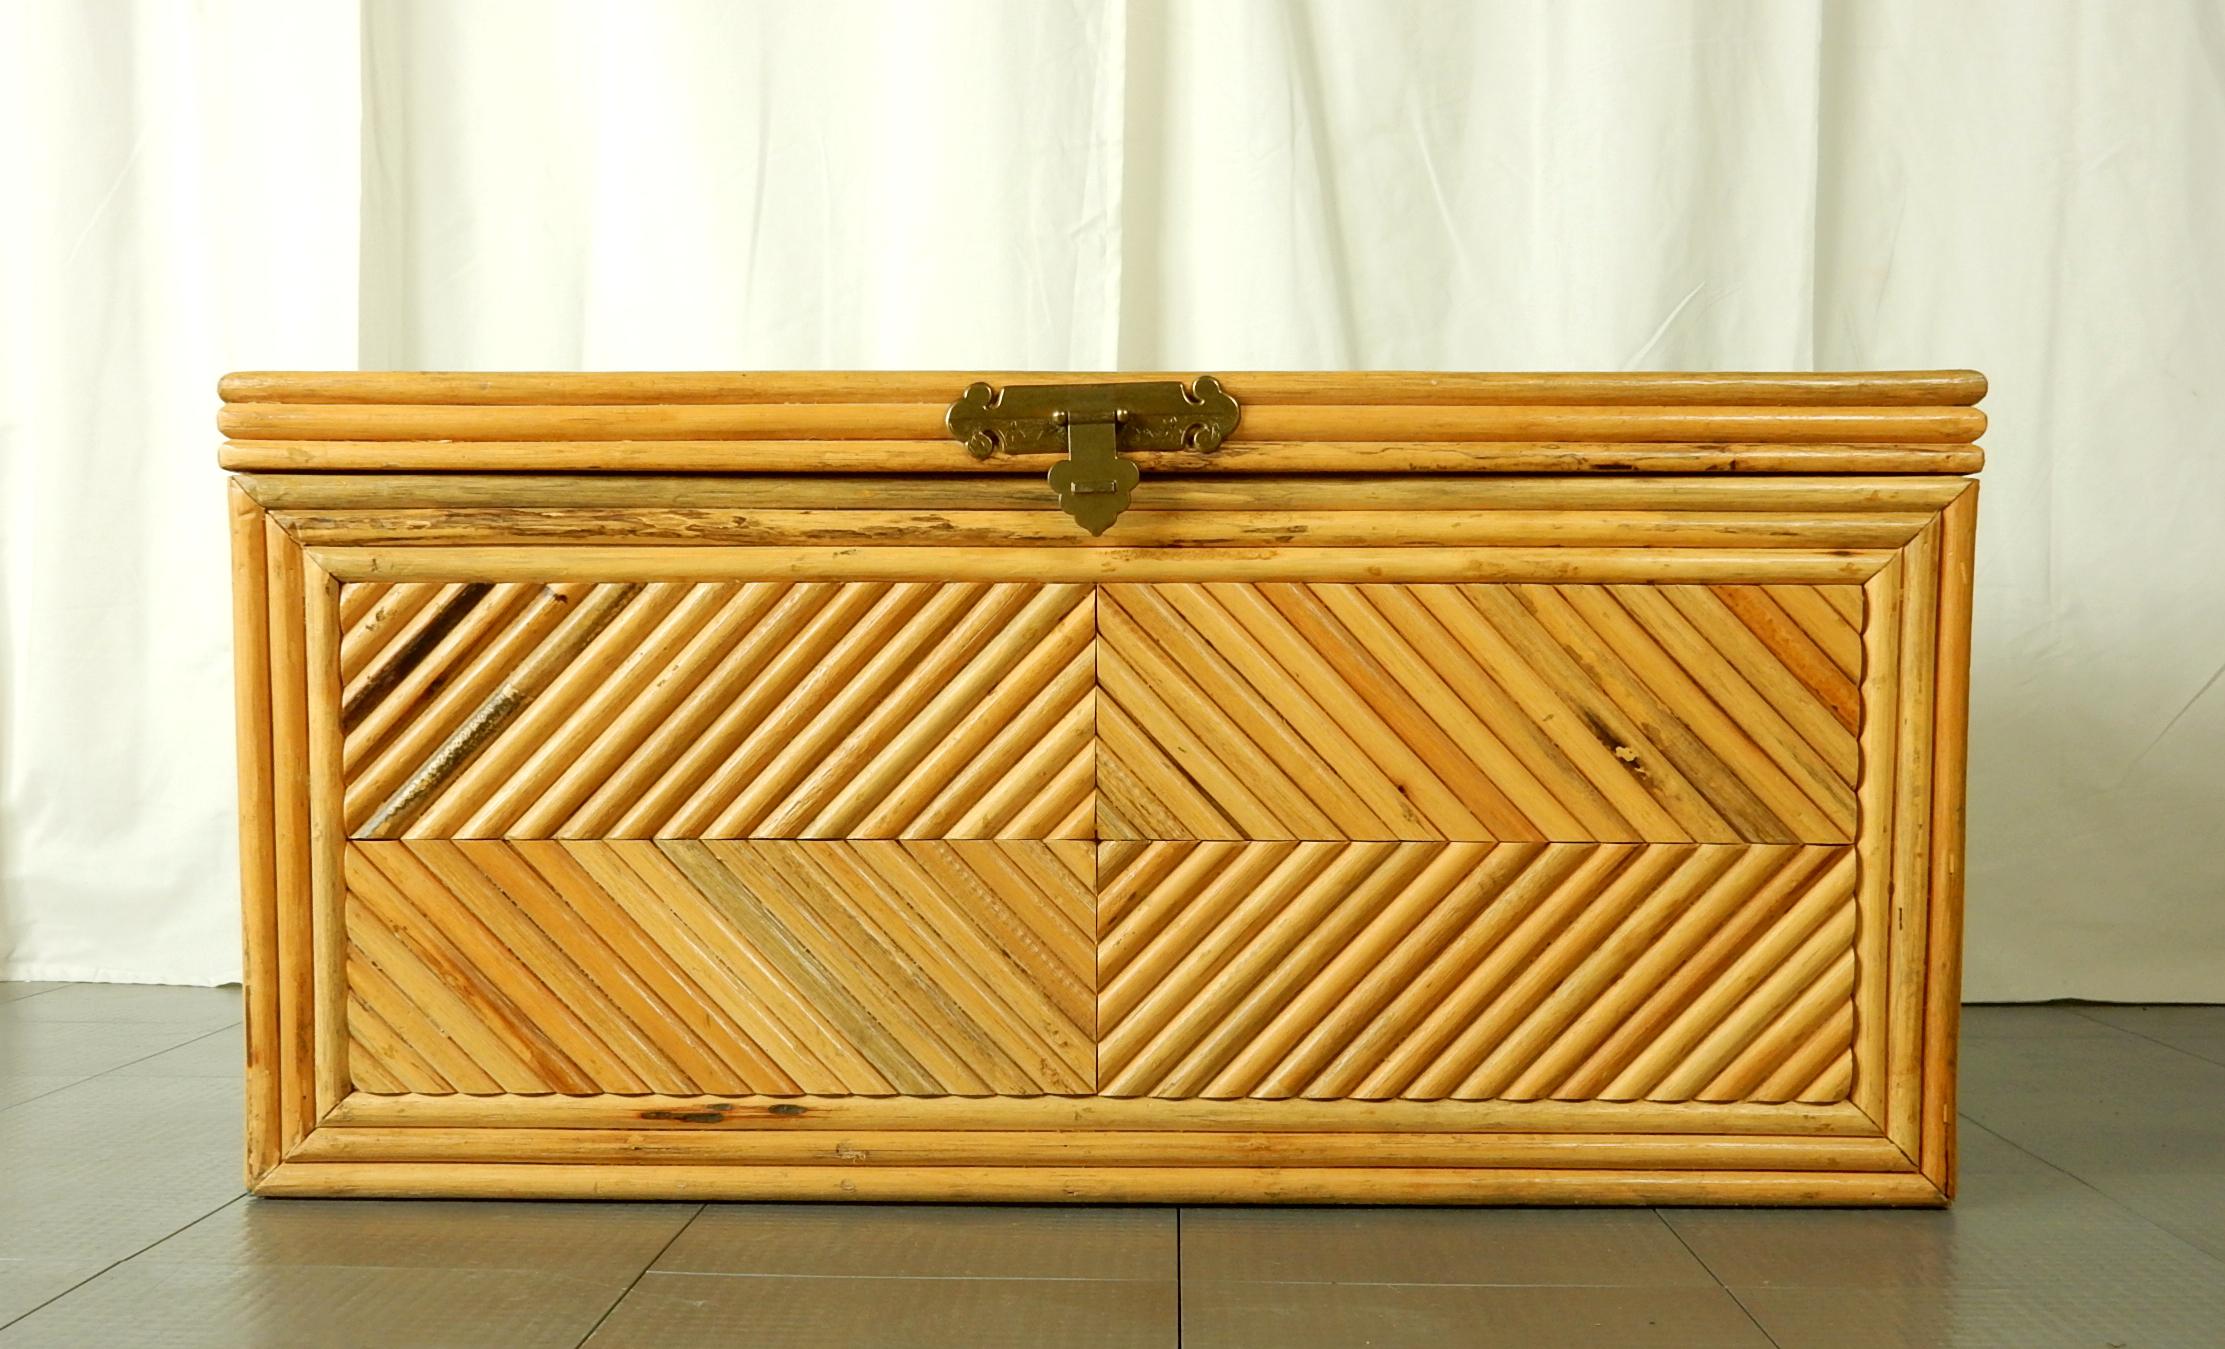 Diamond pattern split Rattan with woven reed top blanket chest.
Solid brass handles and center lid pull.
Artisan handmade. Inside is lined with solid wood.
Brass glides to hold lid open. Could be used as chest, coffee table or bench.
Exceptional